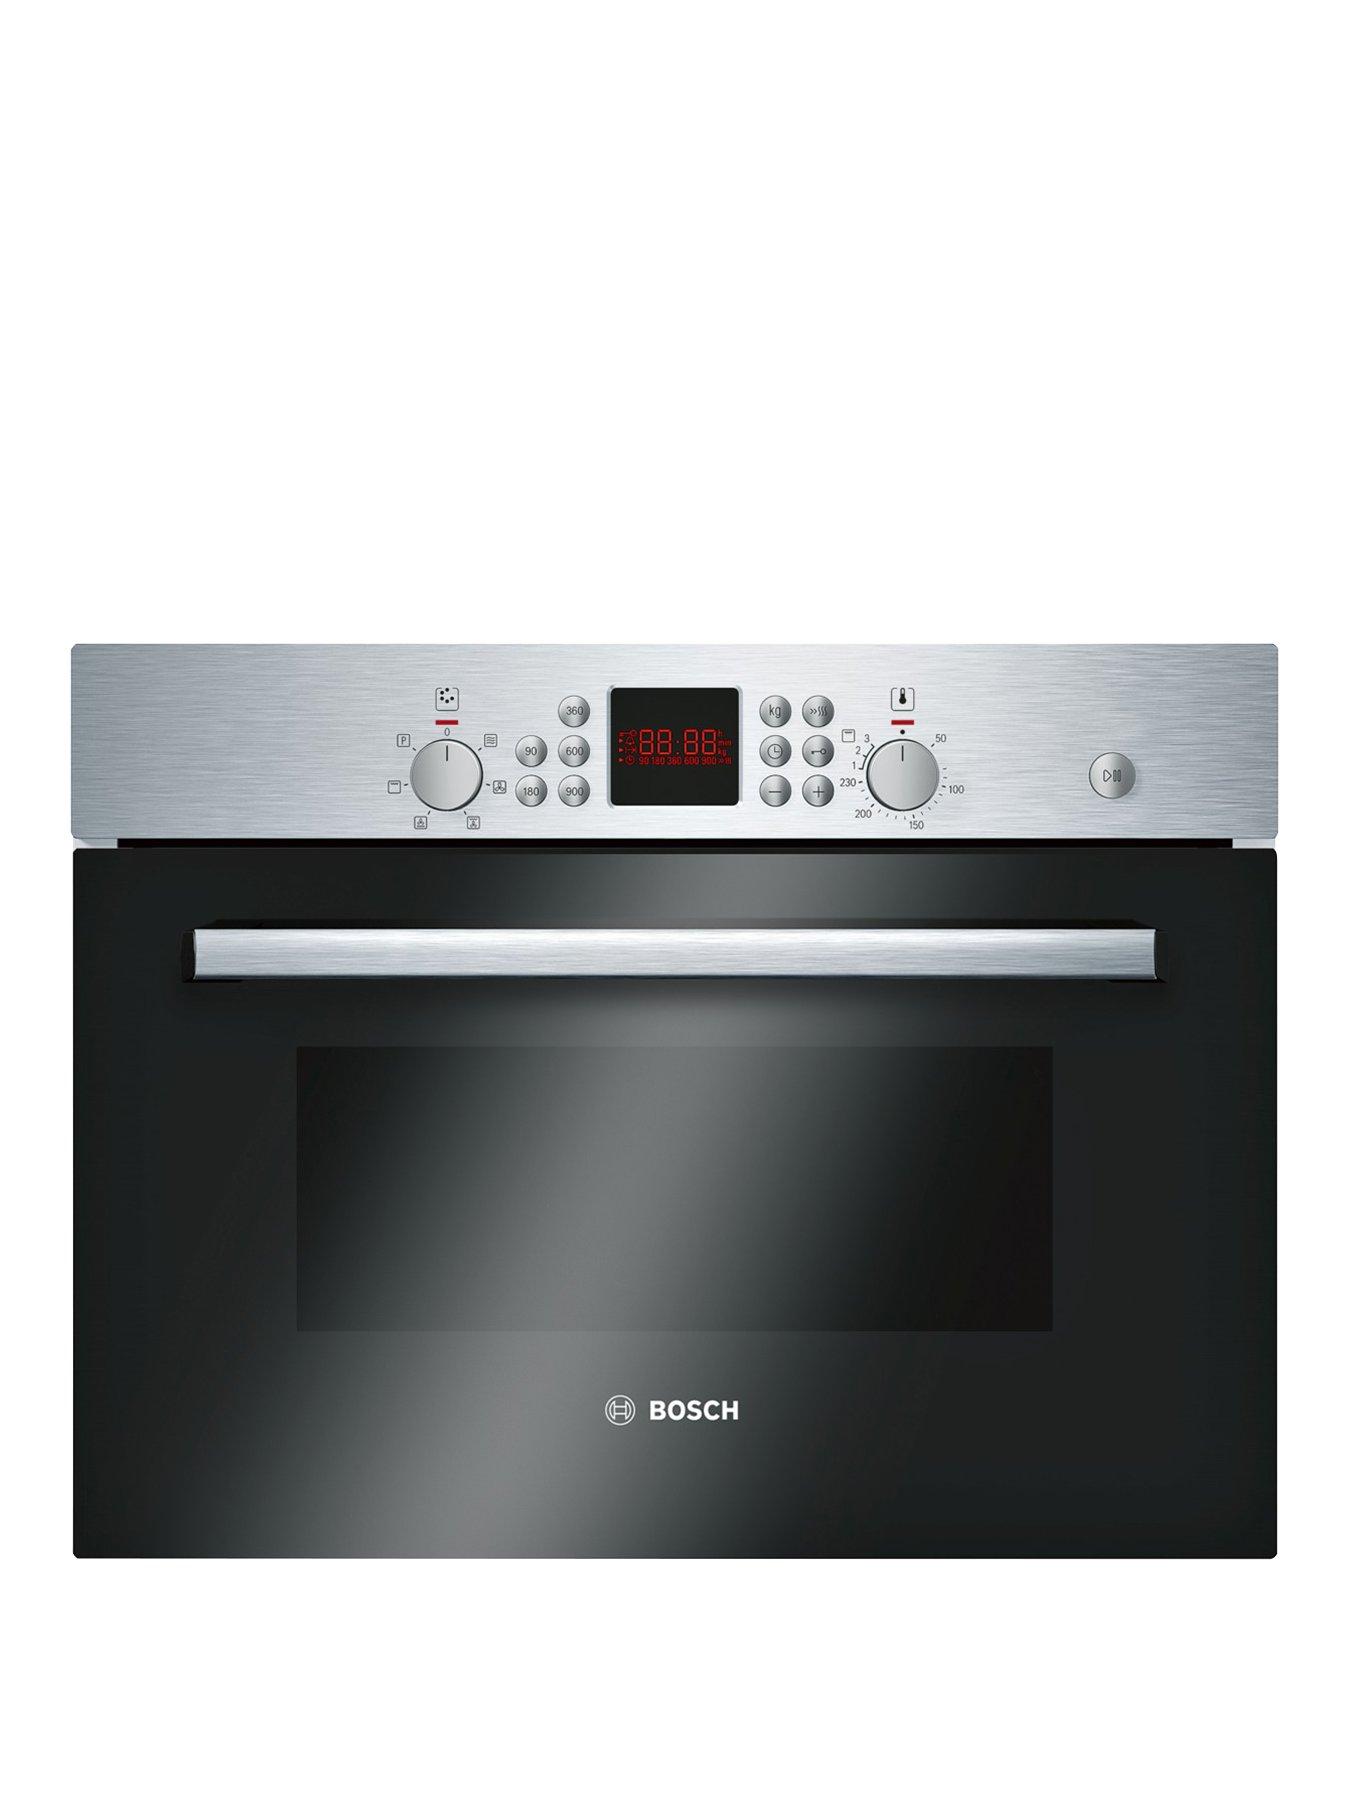 Bosch Serie 6 Hbc84H501B Built-In Combination Microwave Oven - Stainless Steel Review thumbnail